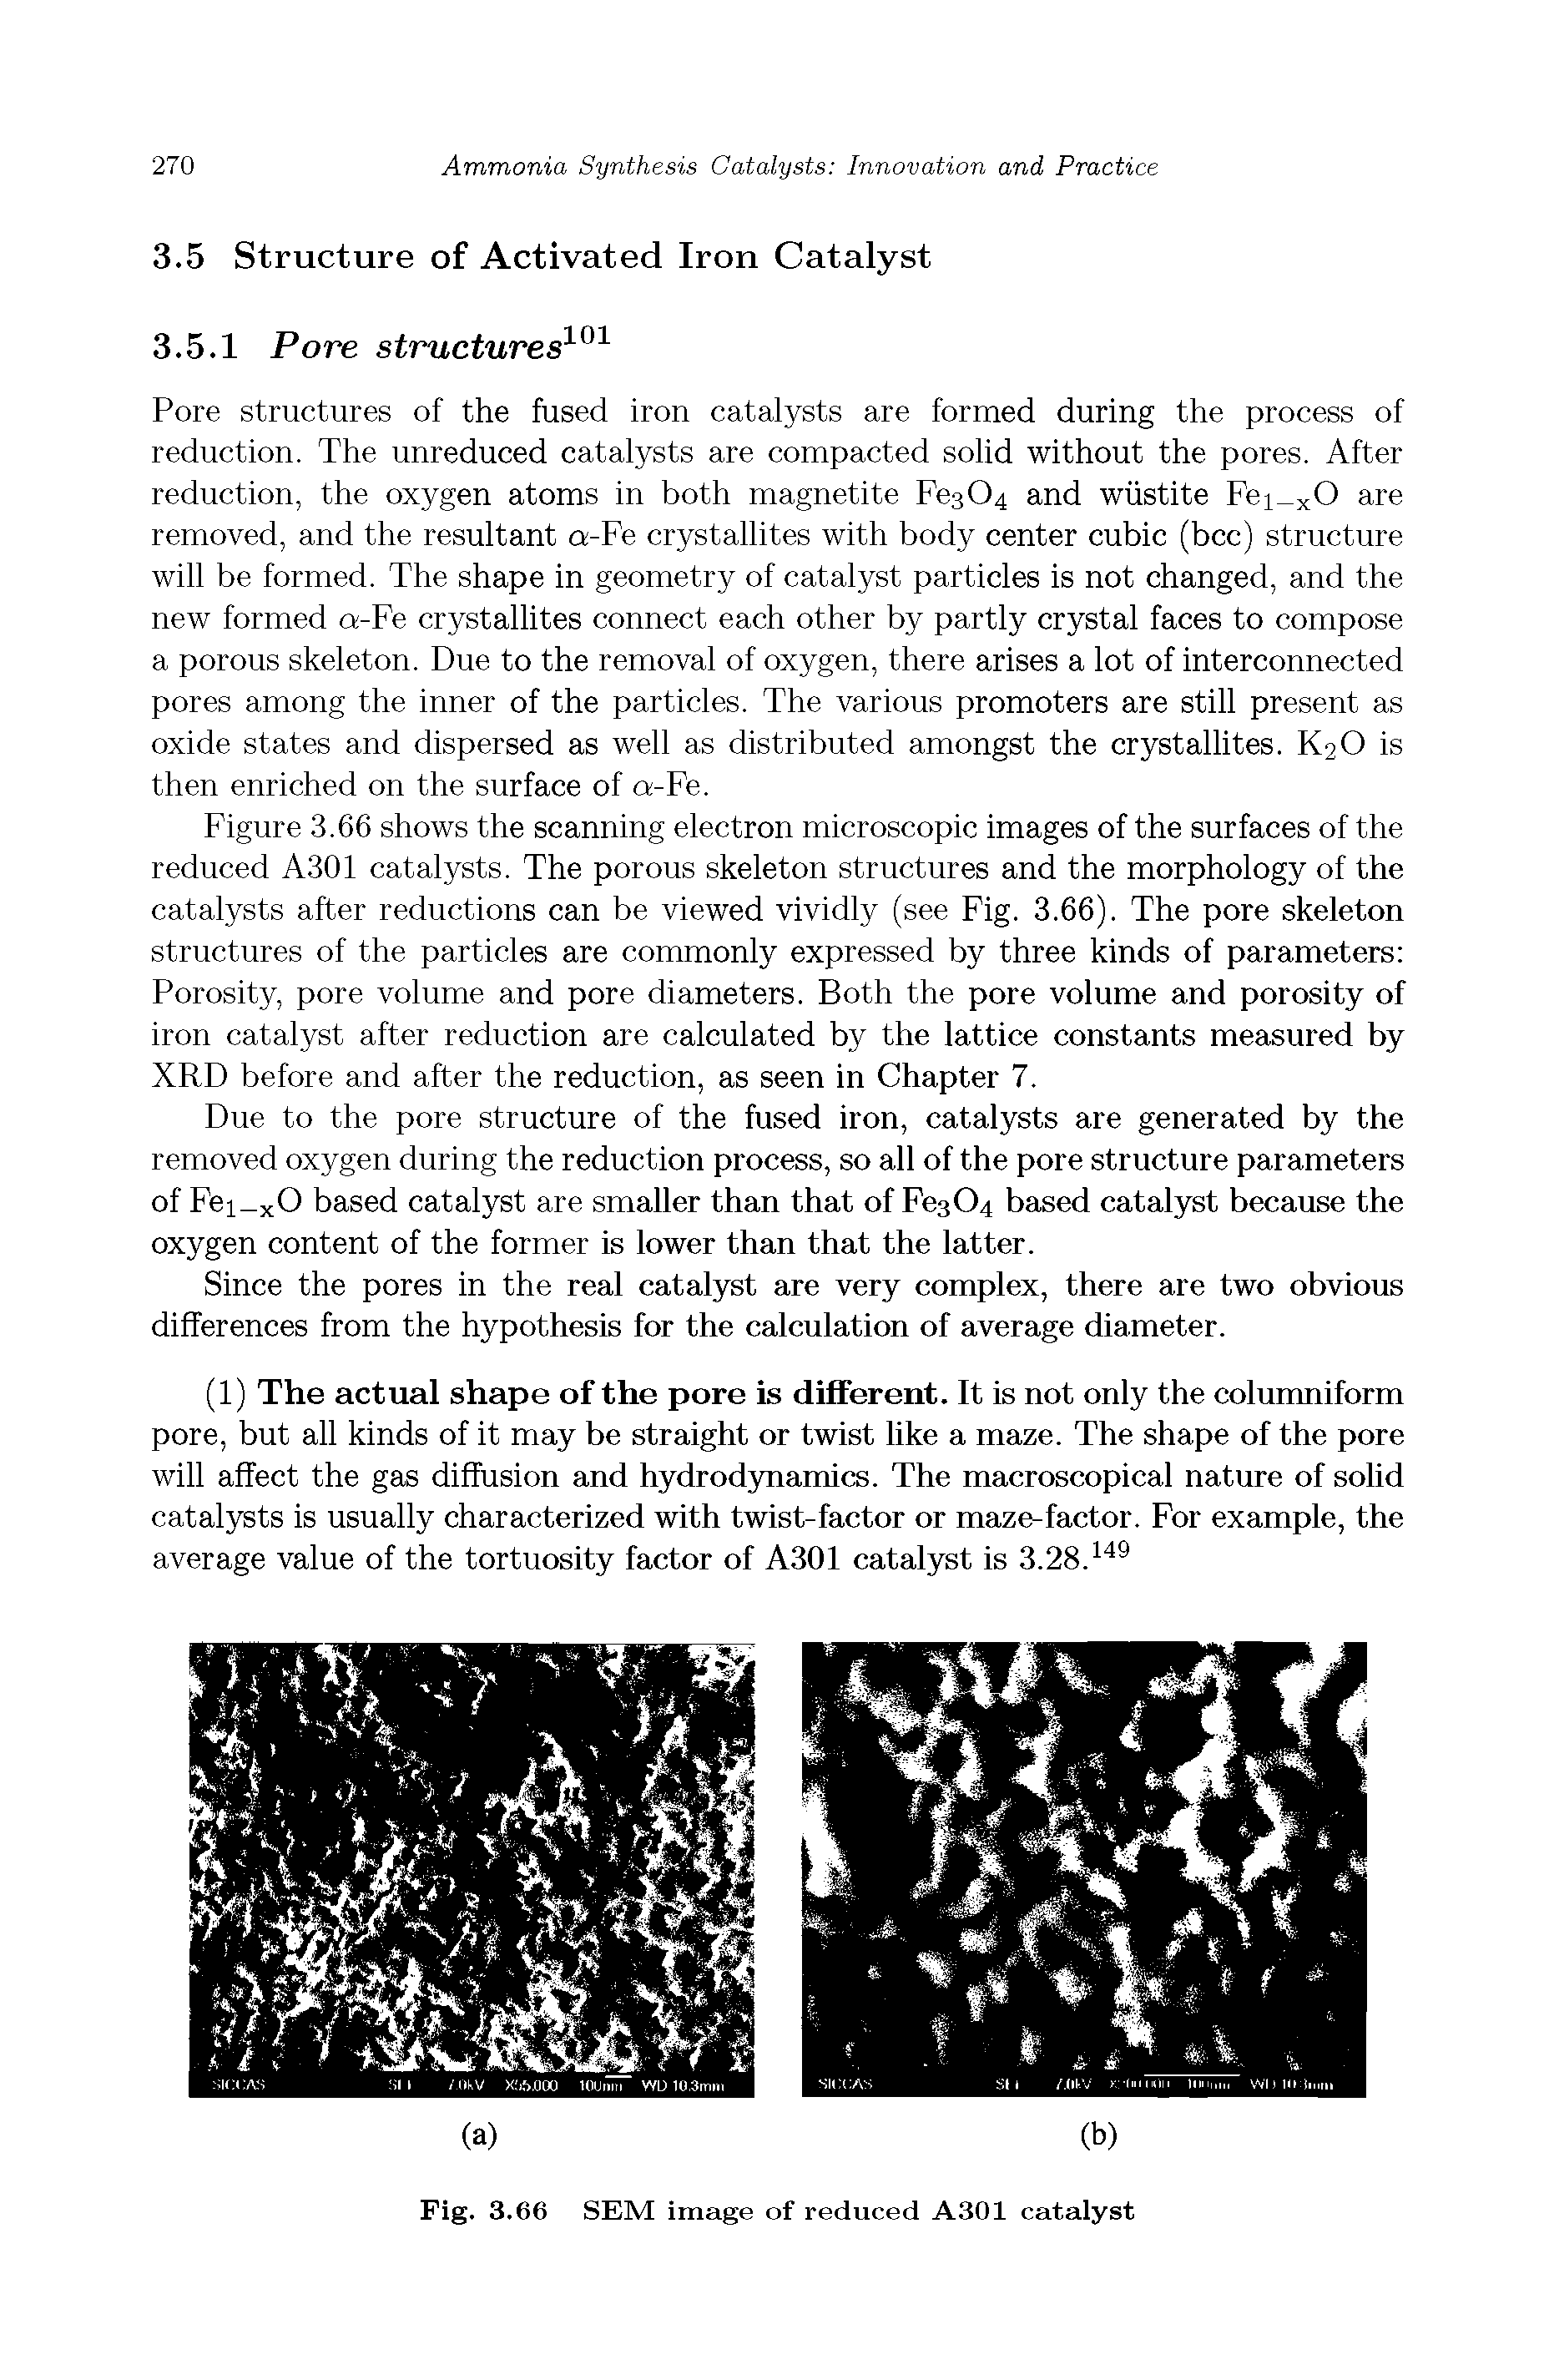 Figure 3.66 shows the scanning electron microscopic images of the surfaces of the reduced A301 catalysts. The porous skeleton structures and the morphology of the catalysts after reductions can be viewed vividly (see Fig. 3.66). The pore skeleton structures of the particles are commonly expressed by three kinds of parameters Porosity, pore volume and pore diameters. Both the pore volume and porosity of iron catalyst after reduction are calculated by the lattice constants measured by XRD before and after the reduction, as seen in Chapter 7.